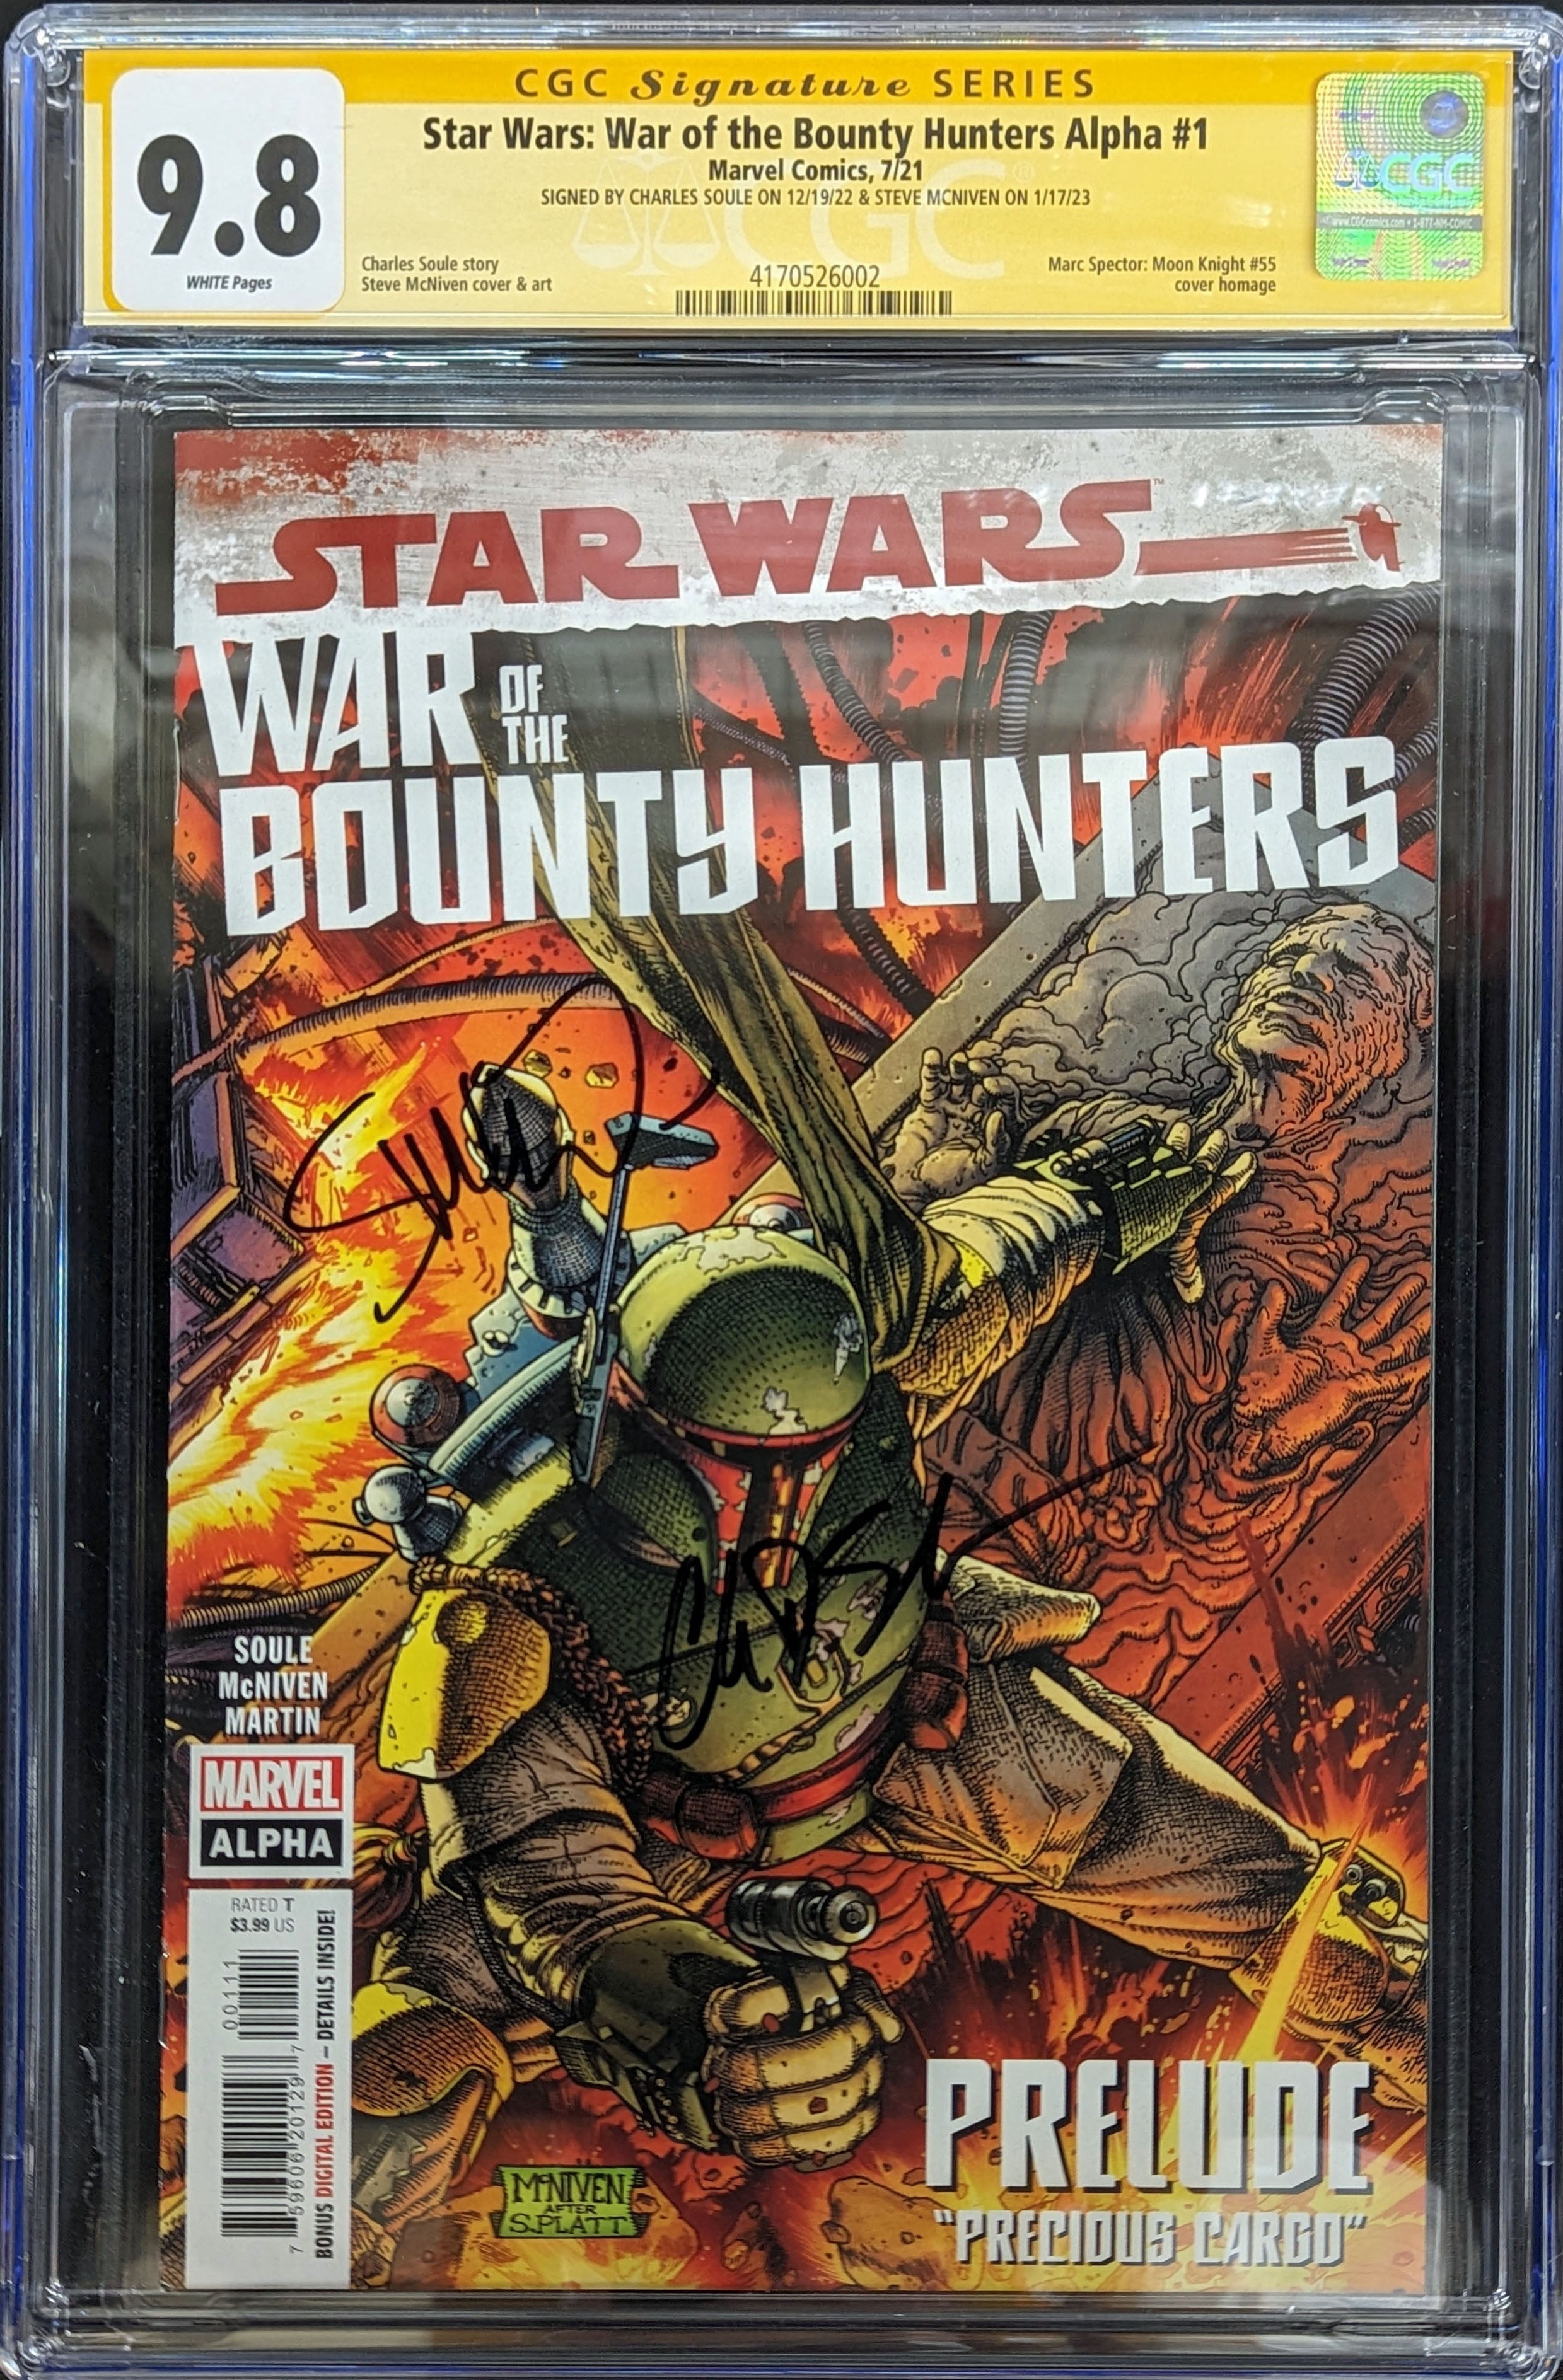 STAR WARS WAR BOUNTY HUNTERS ALPHA #1 CGC 9.8 Signed by NcNiven and Soule